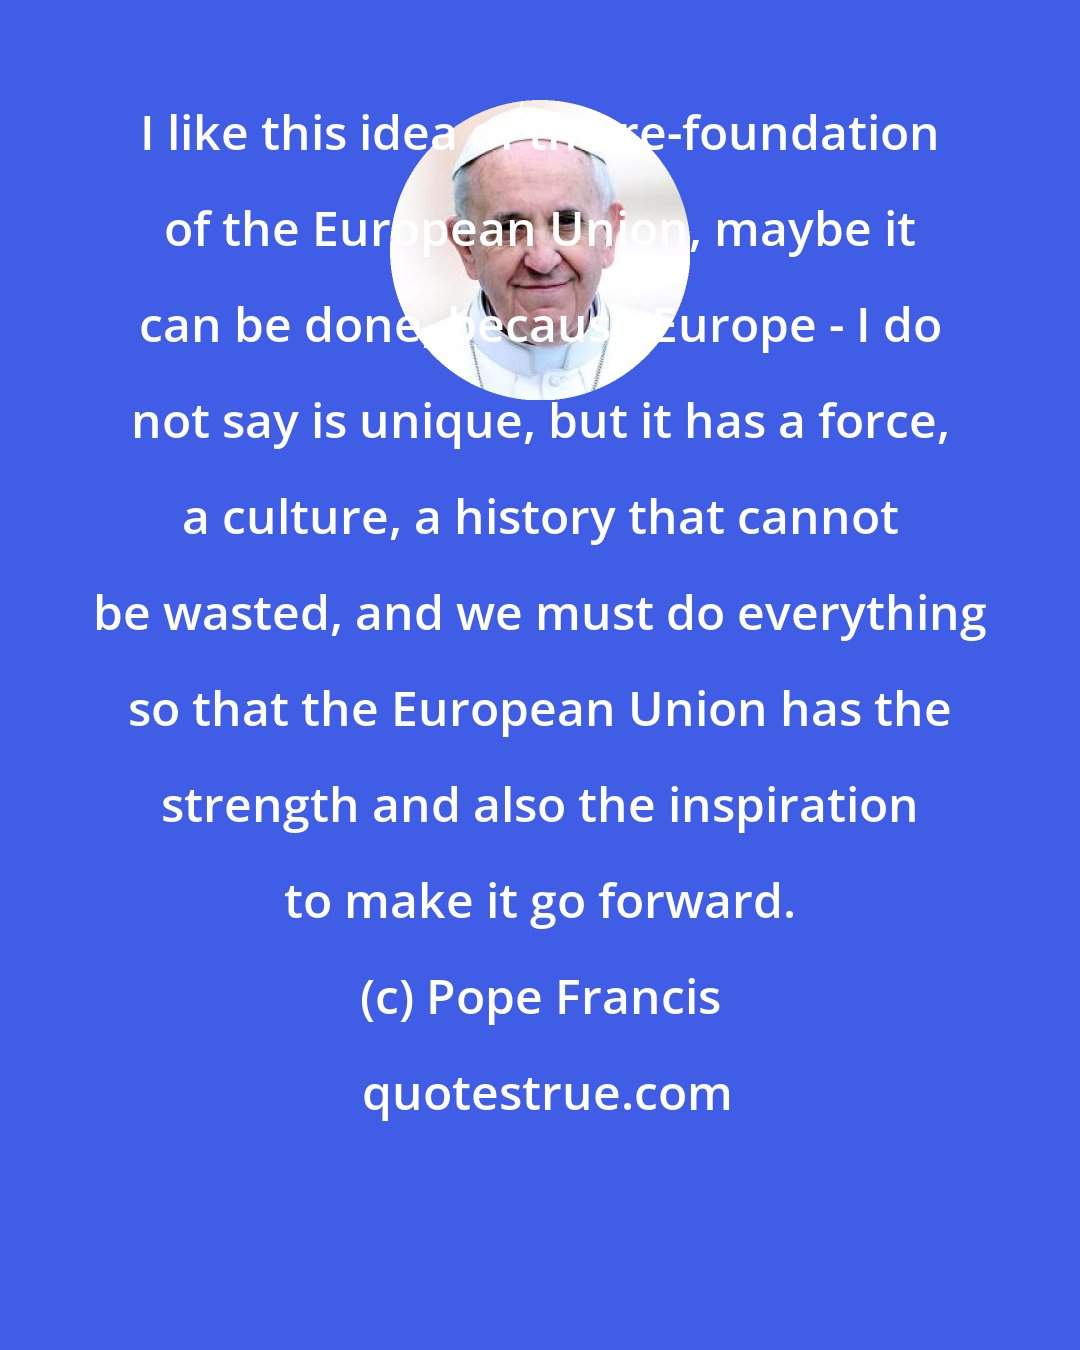 Pope Francis: I like this idea of the re-foundation of the European Union, maybe it can be done, because Europe - I do not say is unique, but it has a force, a culture, a history that cannot be wasted, and we must do everything so that the European Union has the strength and also the inspiration to make it go forward.